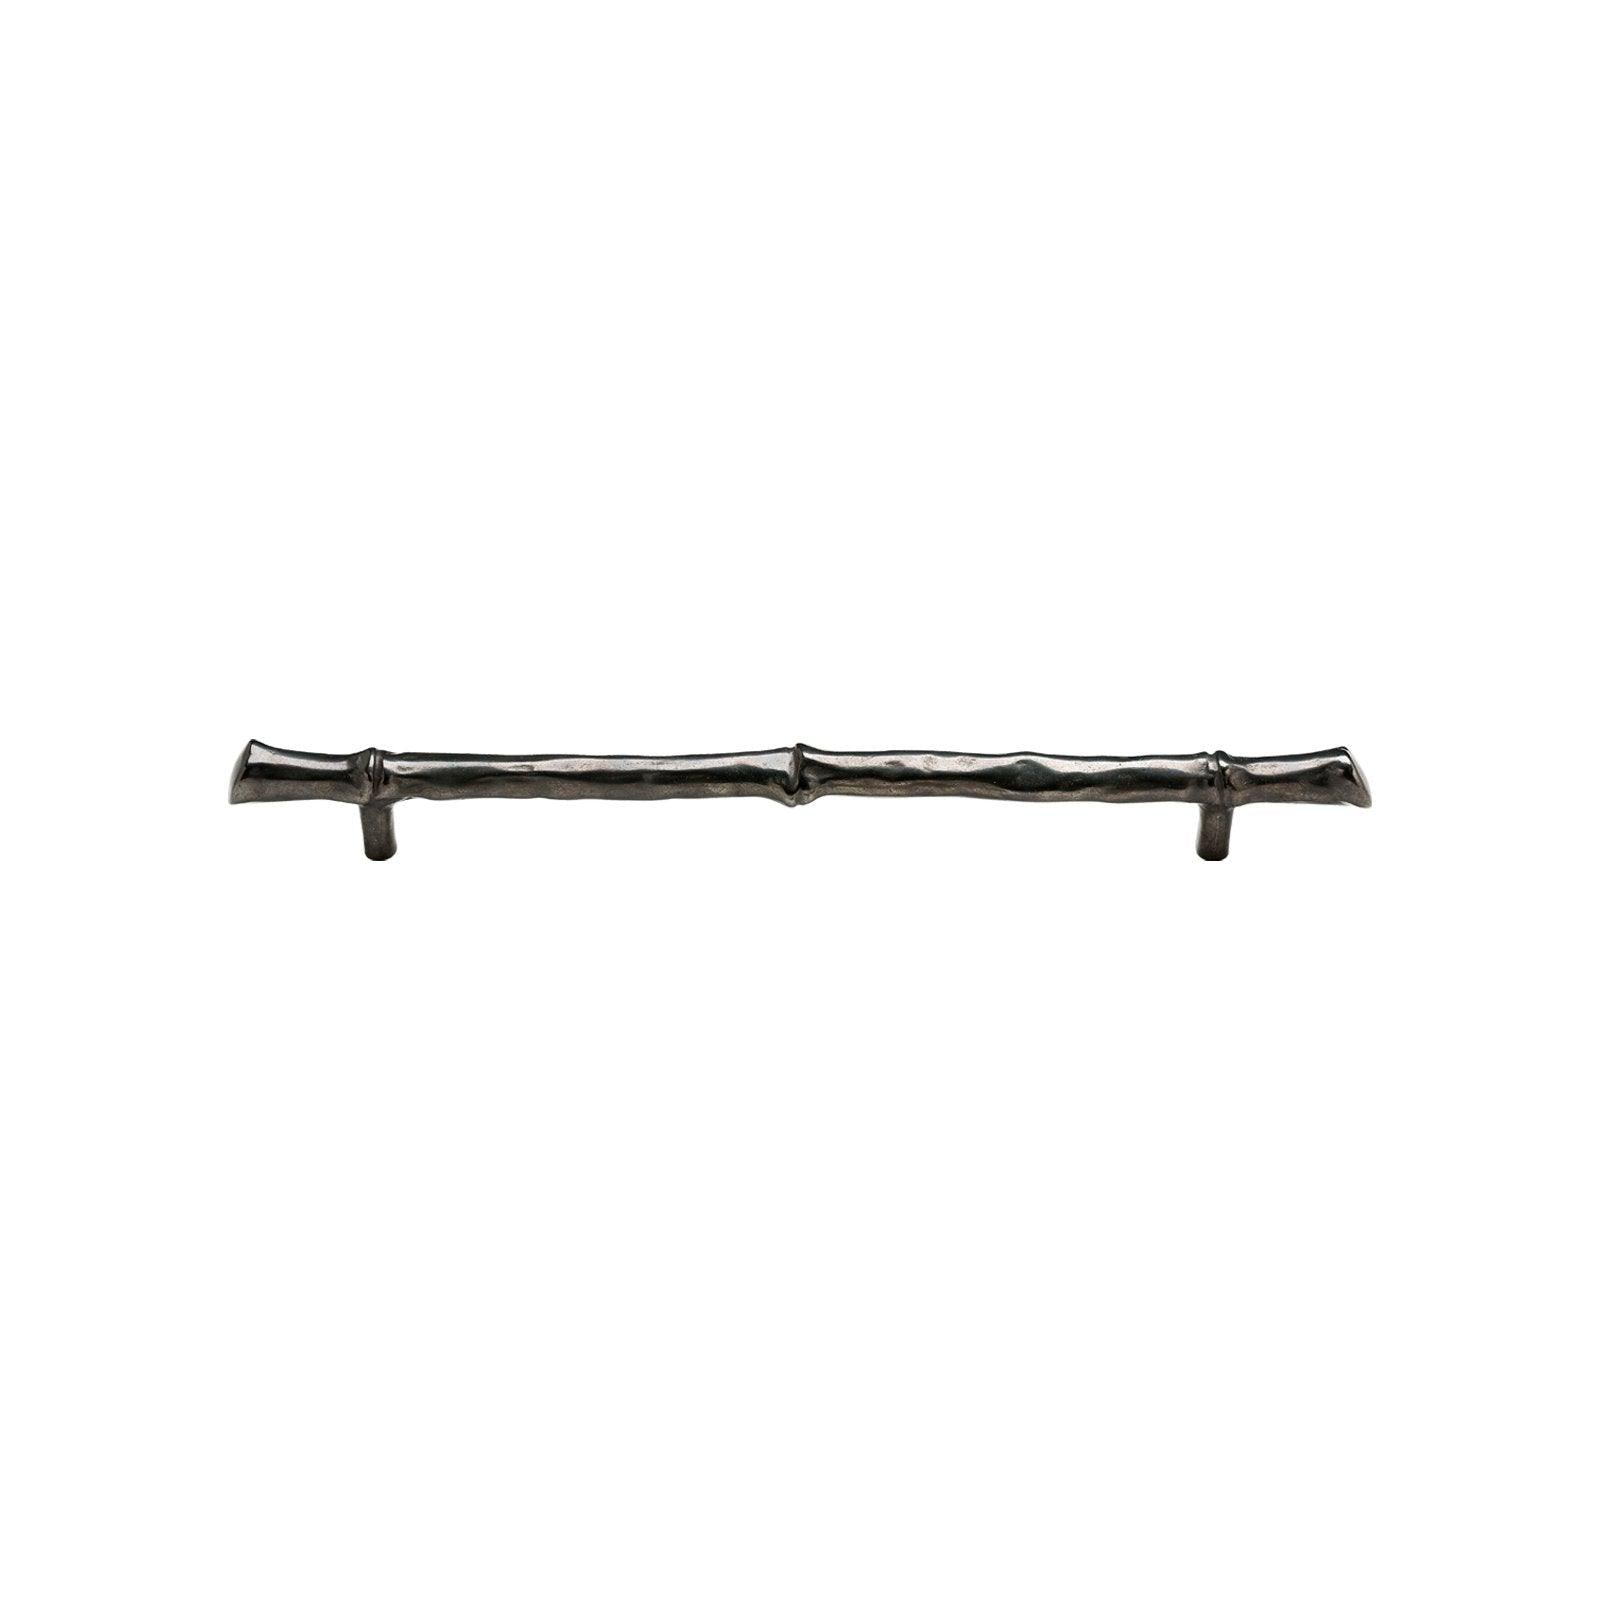 CK454 - 12" C-to-C Bamboo Cabinet Pull - {{ show.name }}